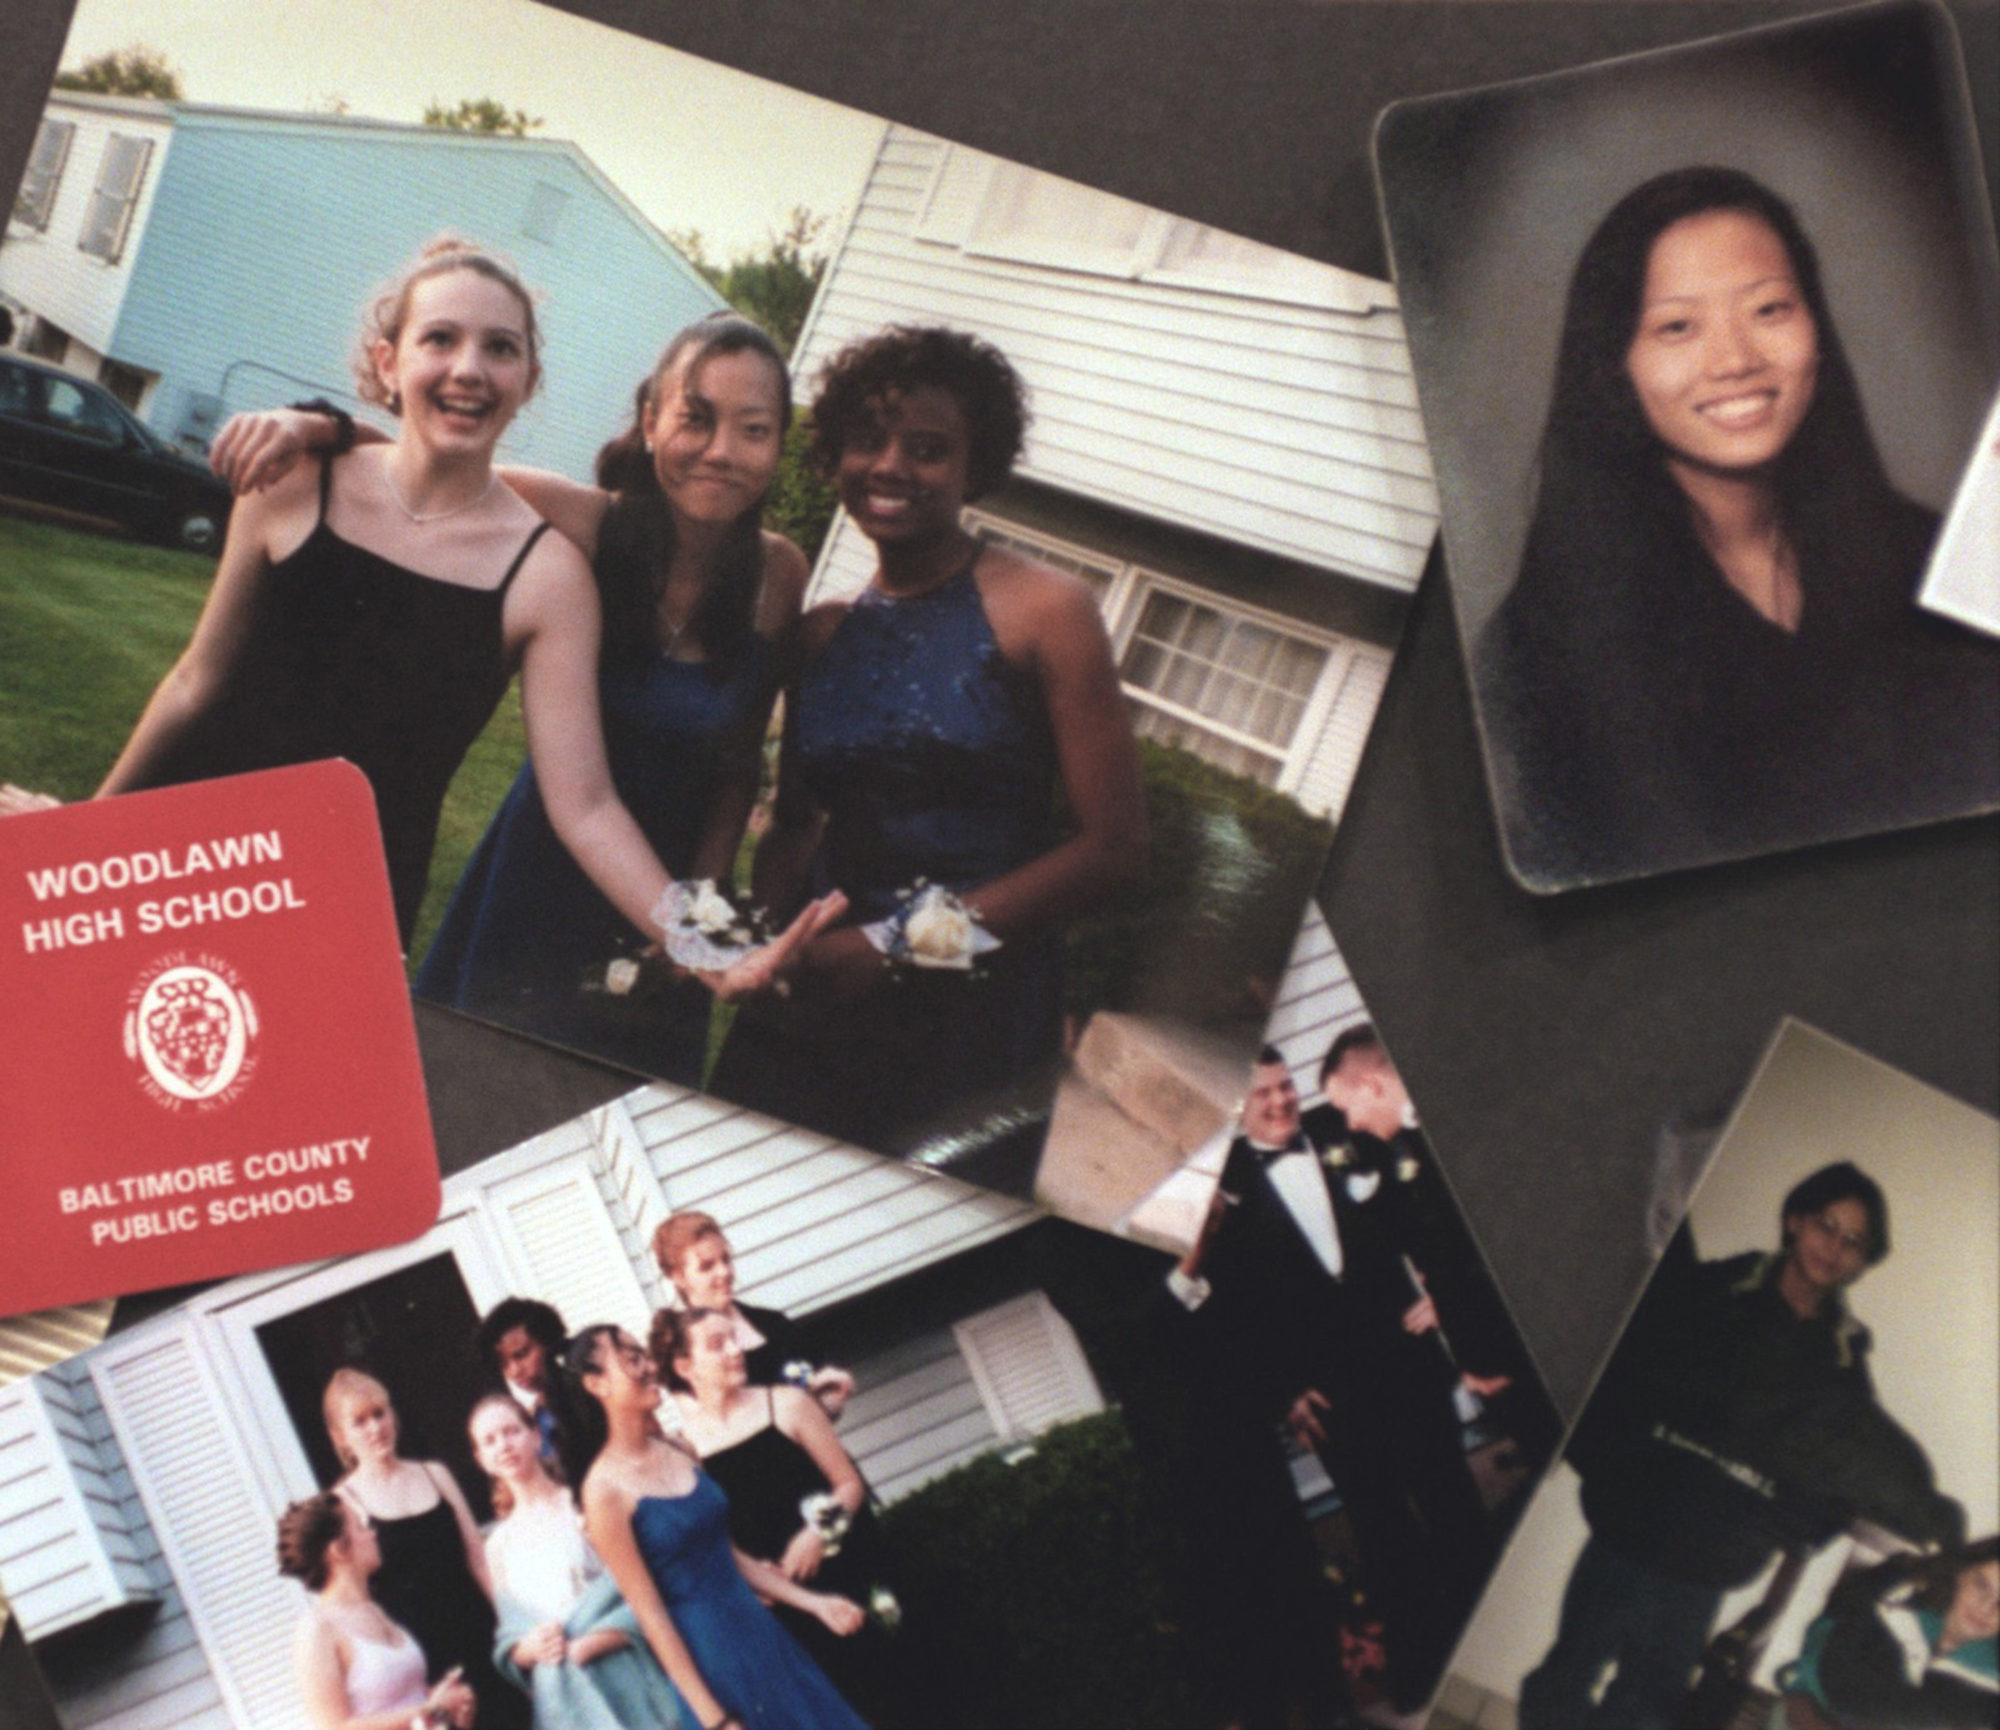 Photographs of Hae Min Lee and her friends. Lee’s murder in 1999 and the conviction of her ex-boyfriend Adnan Syed are the subject of 
the first season
of “Serial”